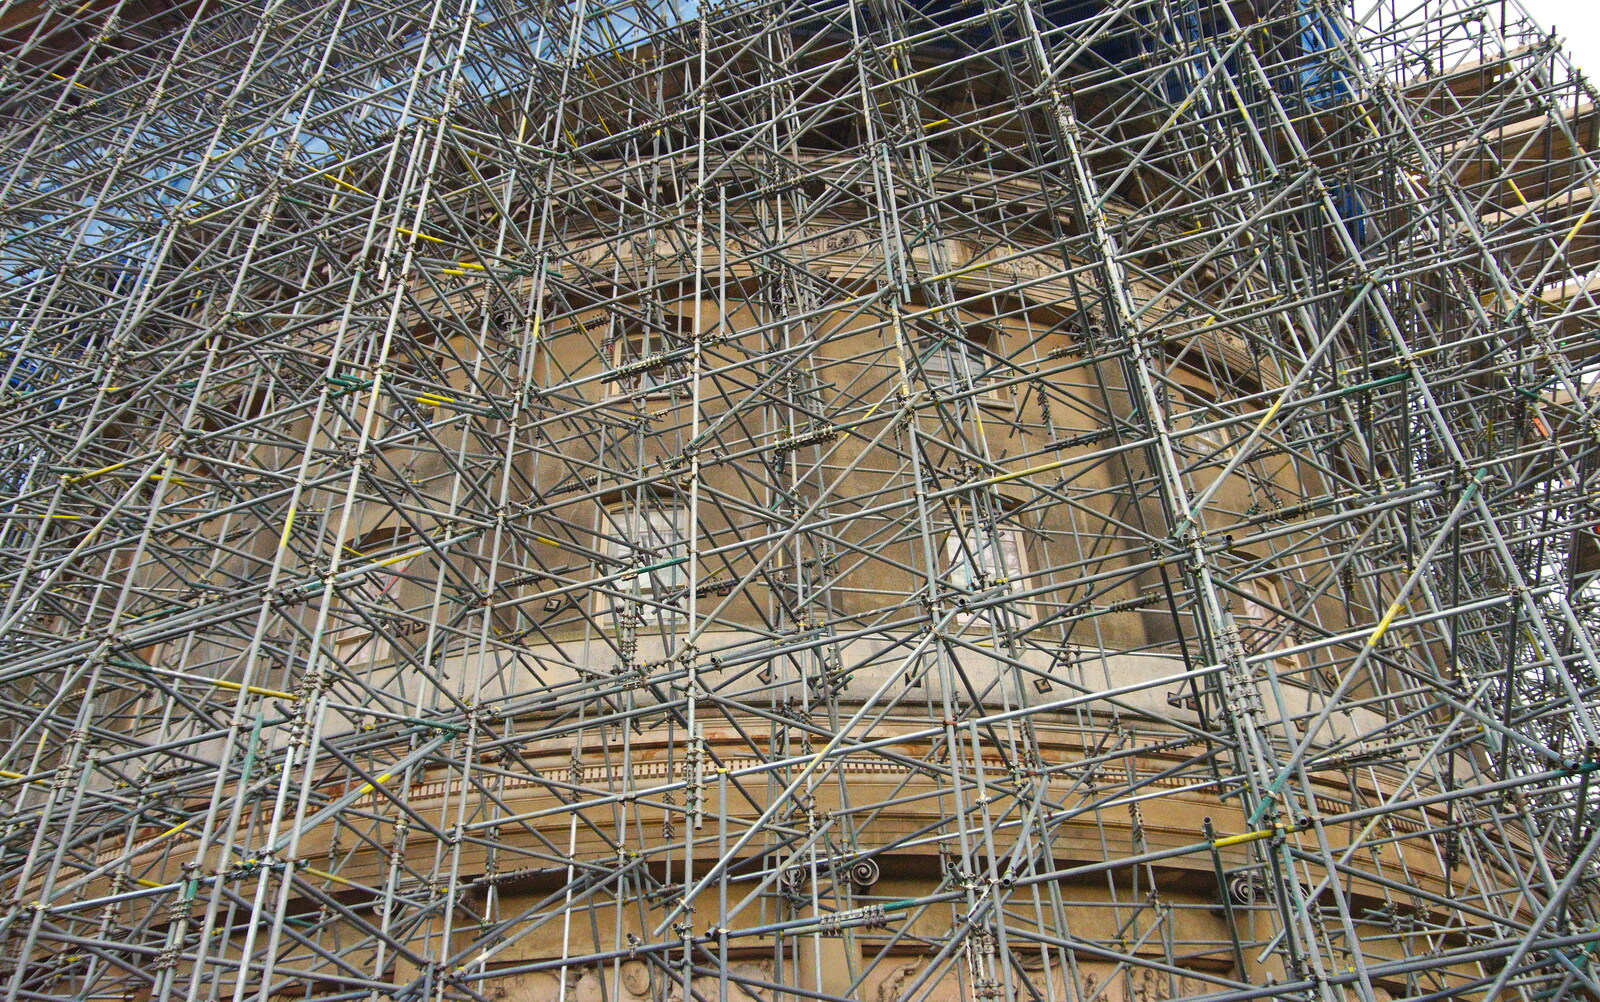 There are thousands of scaffolding poles involved from The Tiles of Ickworth House, Horringer, Suffolk - 30th November 2019